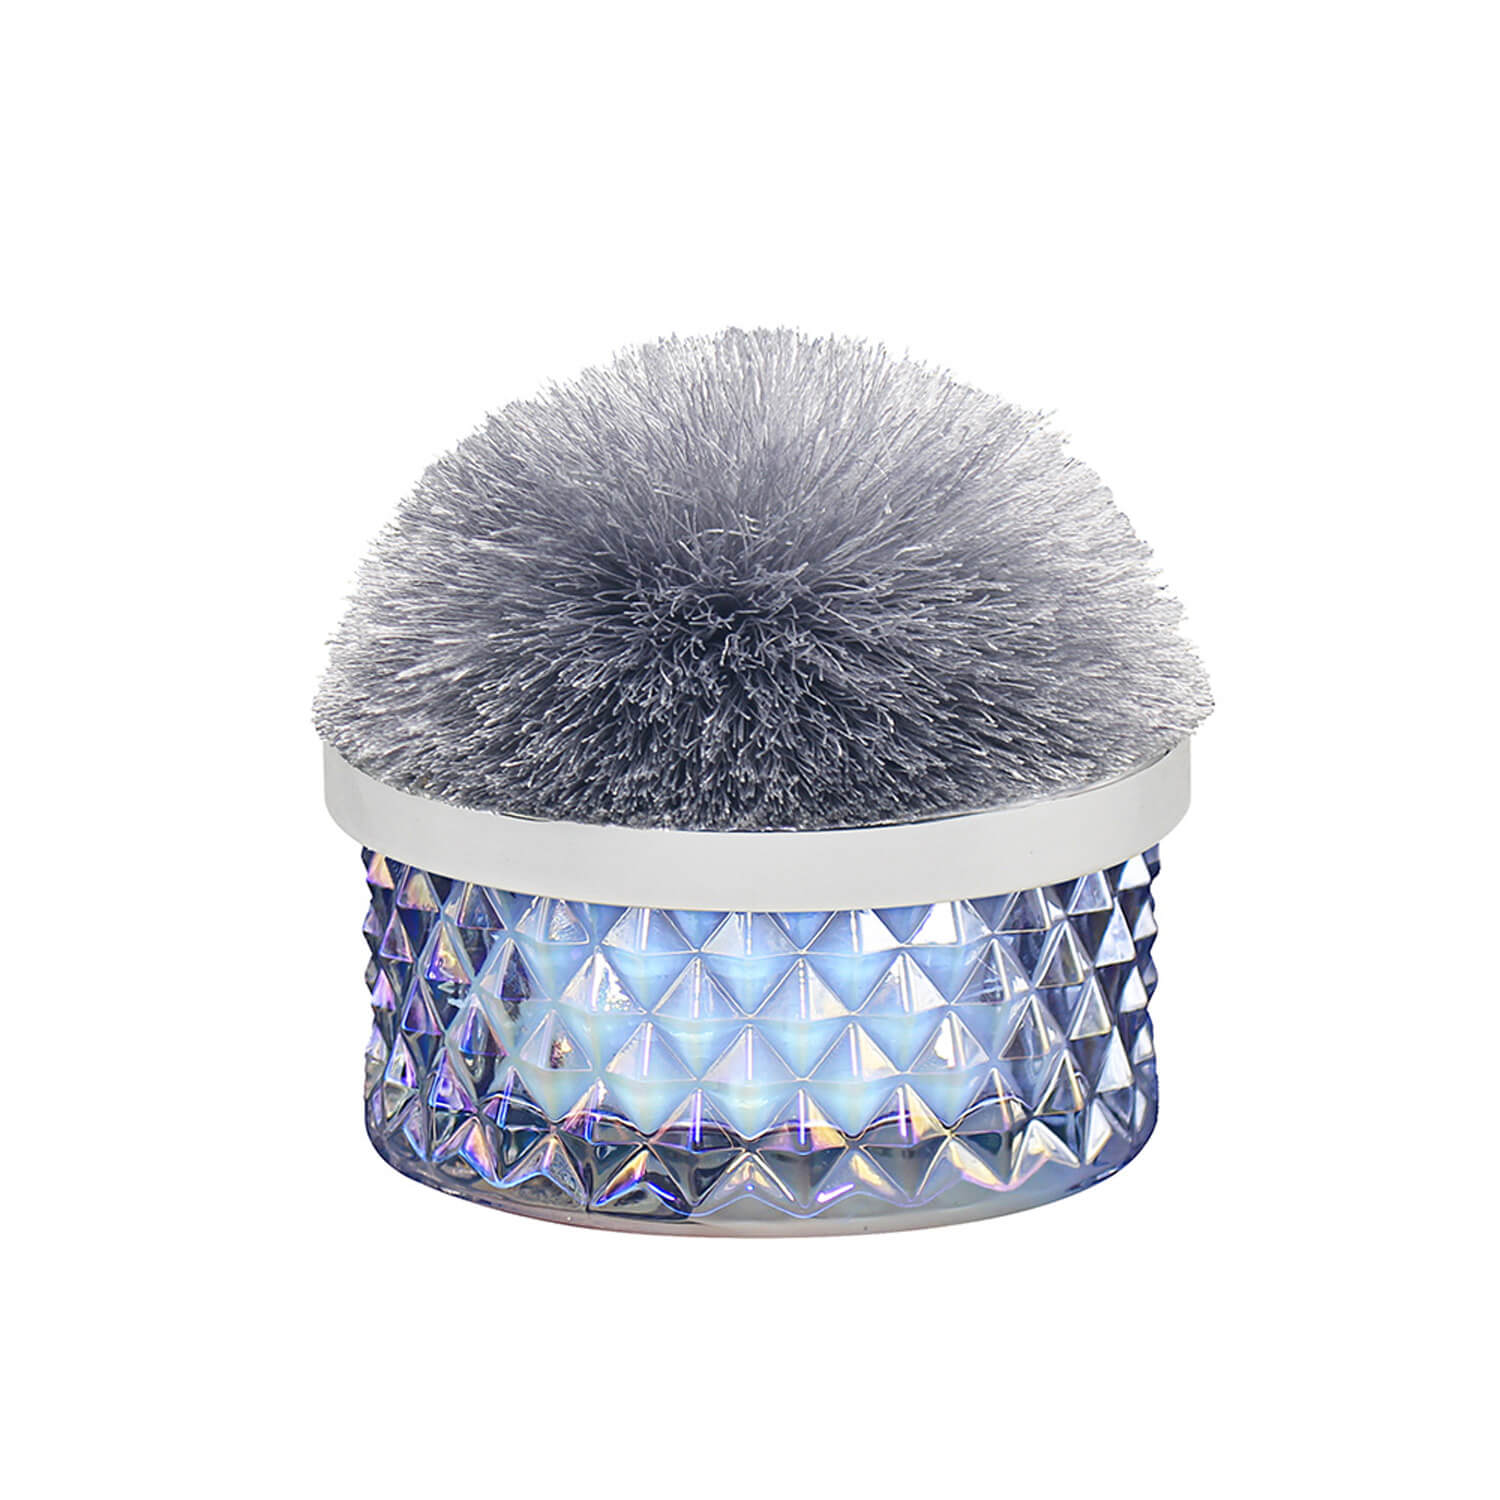 The Home Collection Pom Pom Candle 1 Shaws Department Stores